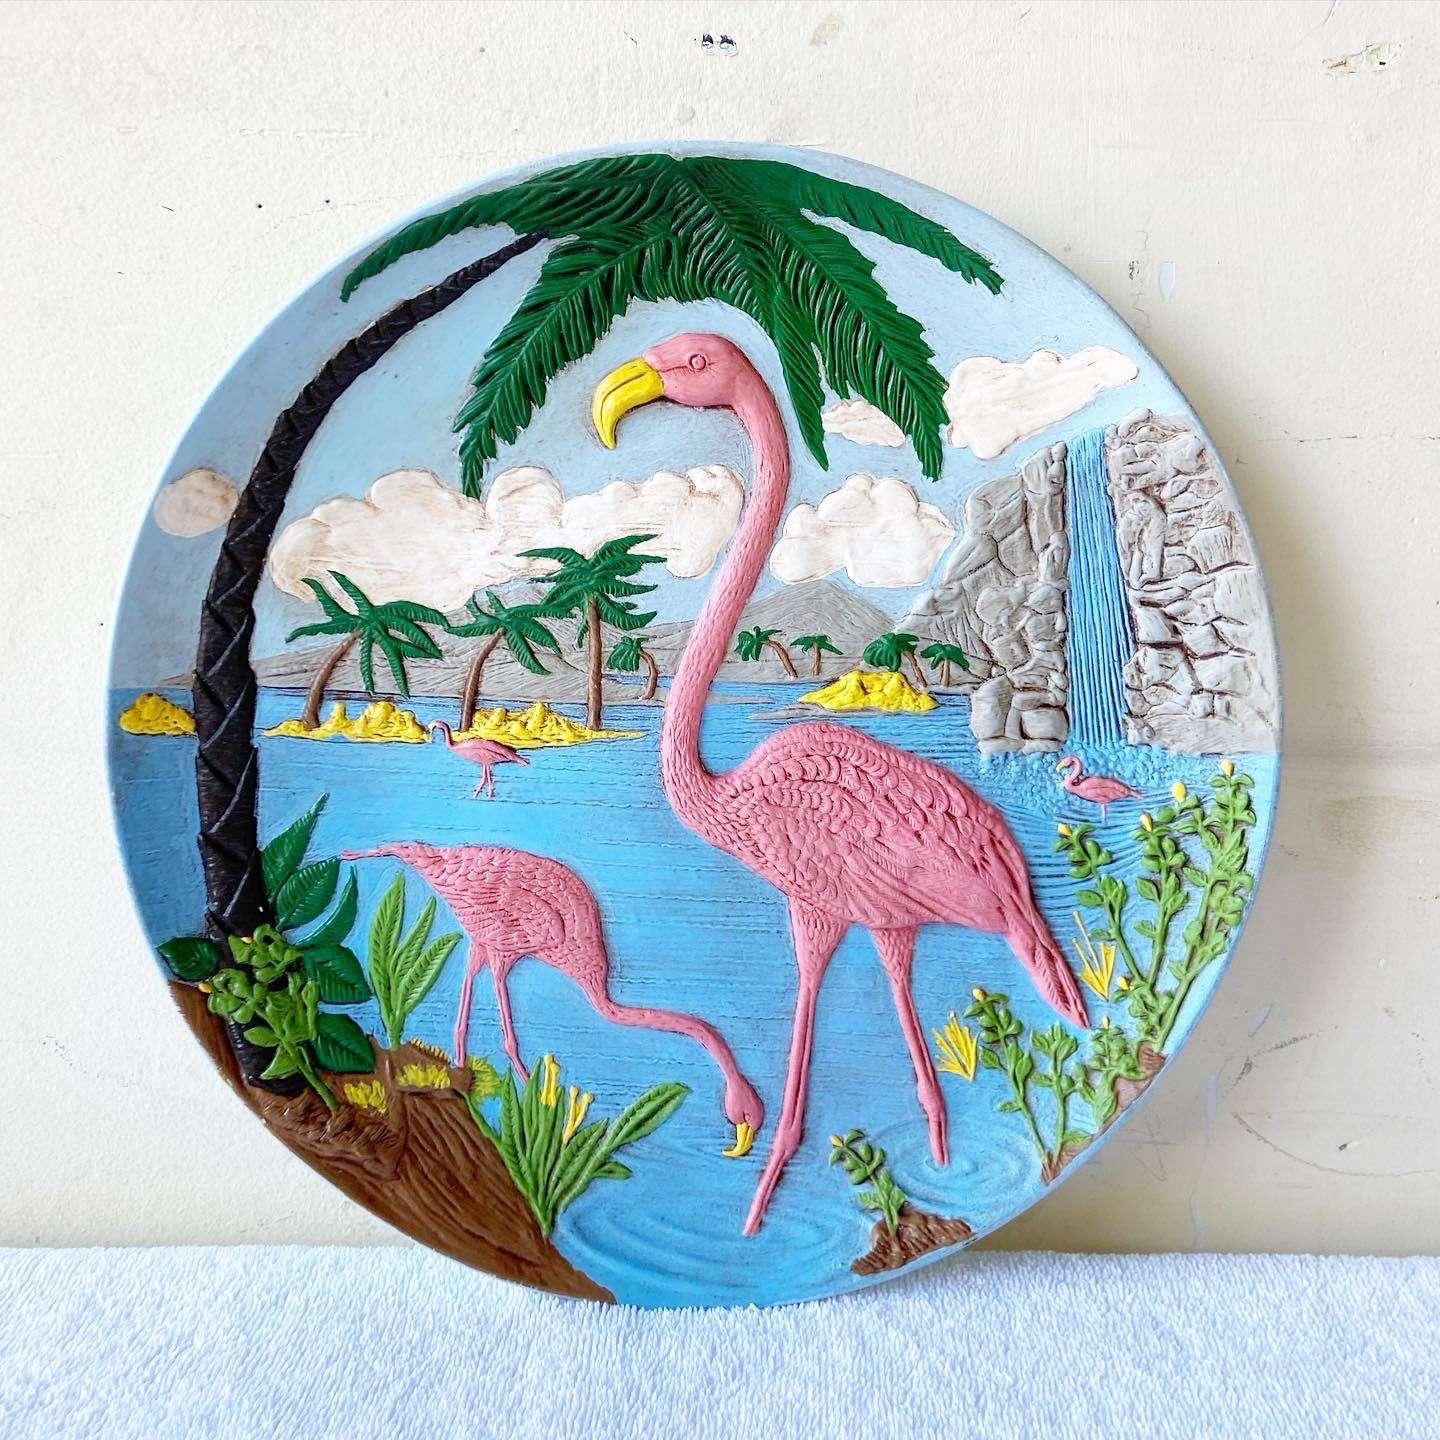 Wonderful vintage tropical ceramic decorative plate. Features molded and hand painted flamingos, palms and tropic vibes.
